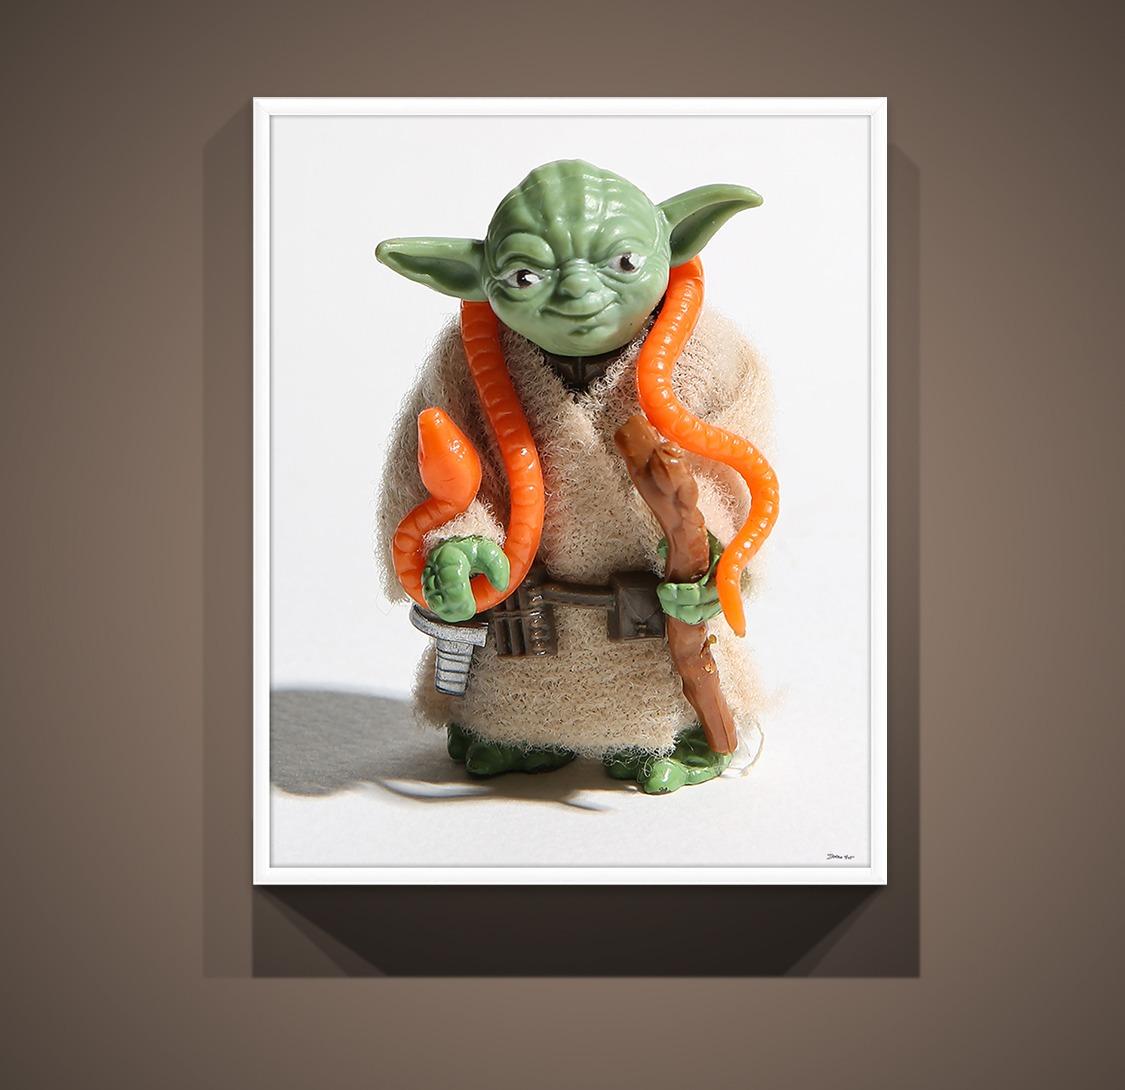 60x45 Yoda  Star Wars, Toy, Photography Art Pop Art Kenner Toys Photograph For Sale 3